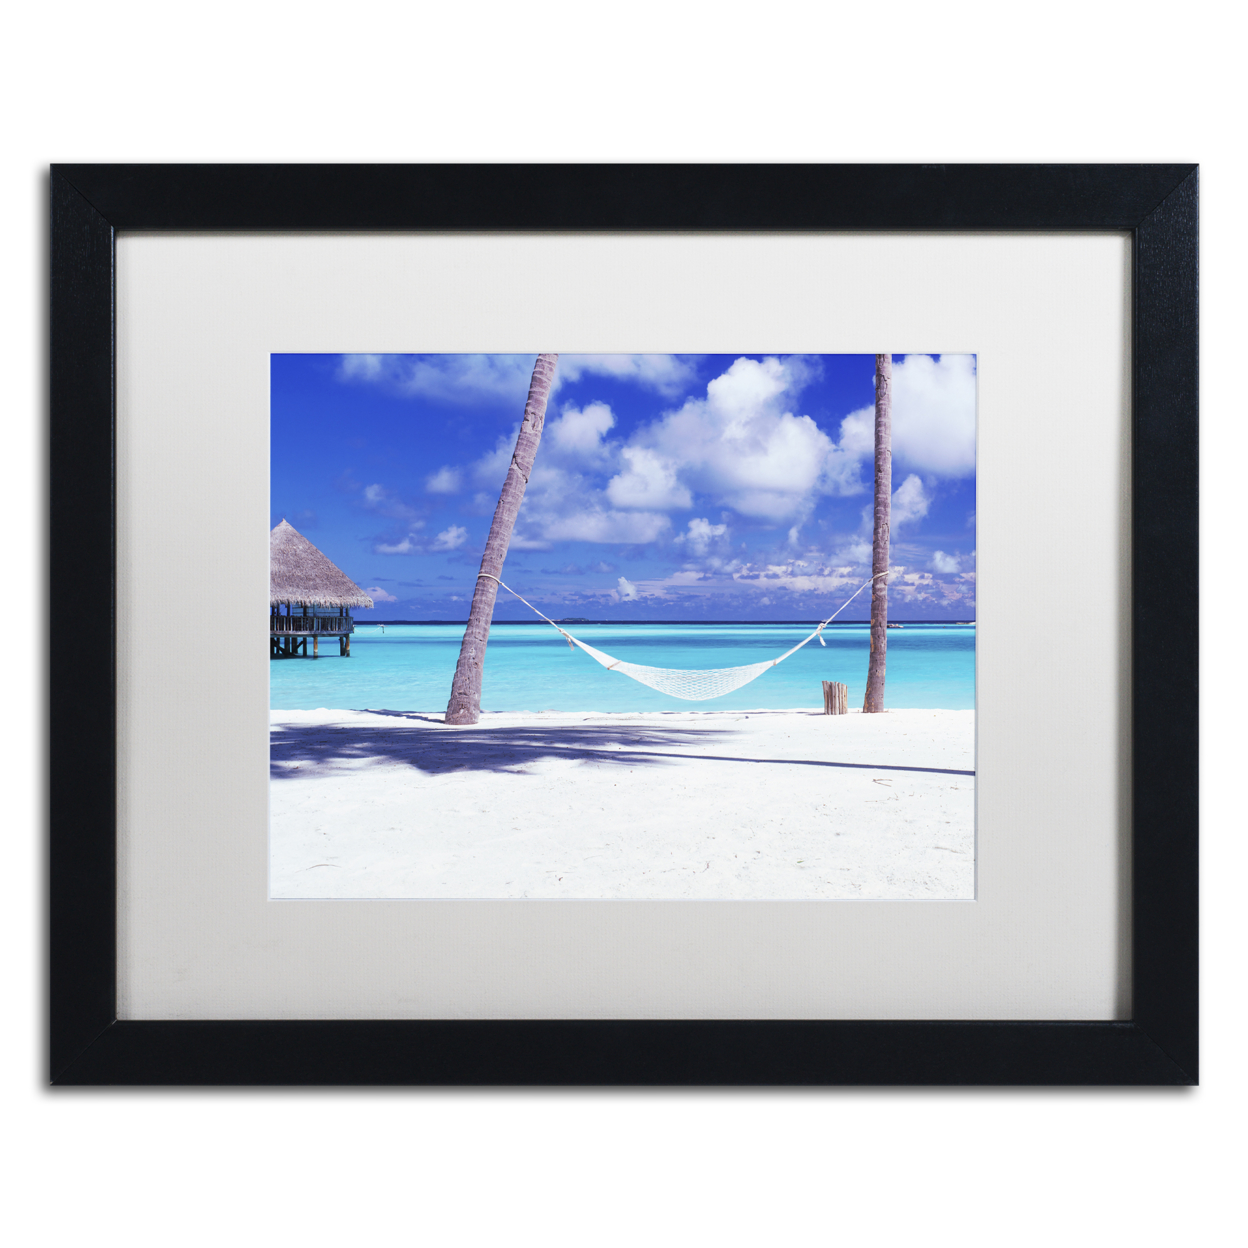 David Evans 'View For One-Maldives' Black Wooden Framed Art 18 X 22 Inches